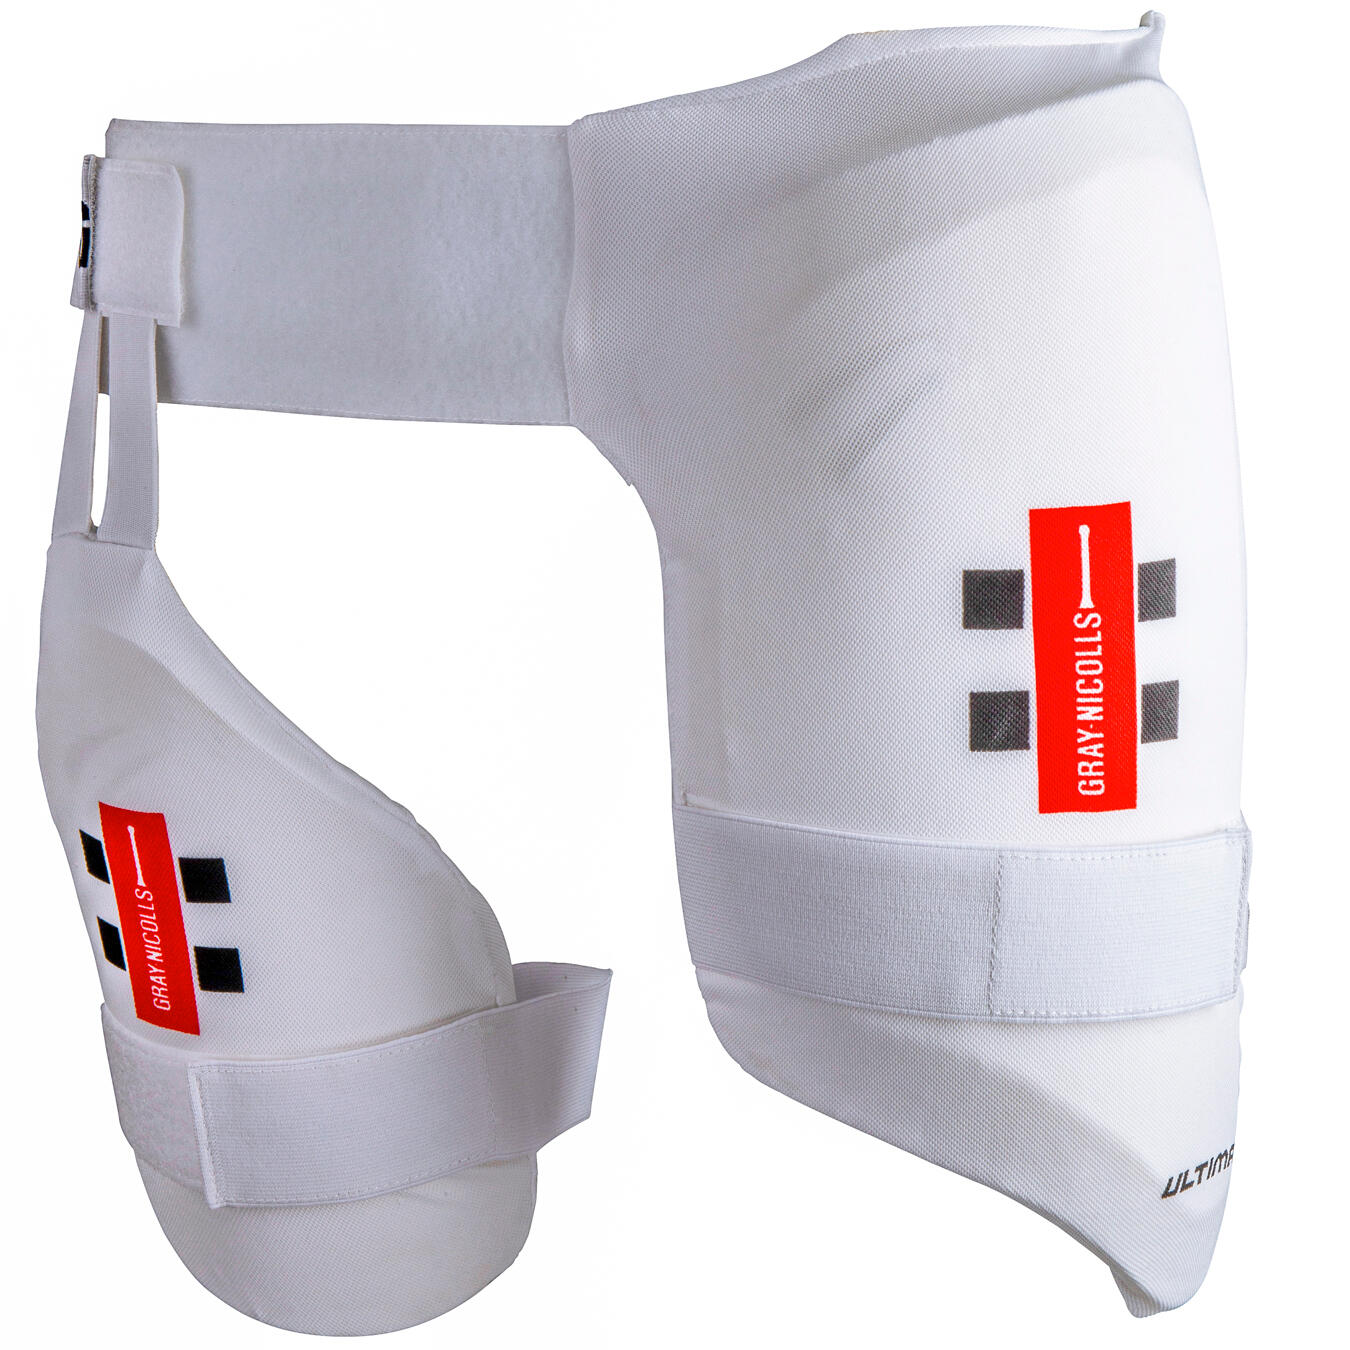 All In One Academy Thigh Pads, White, RH 1/1